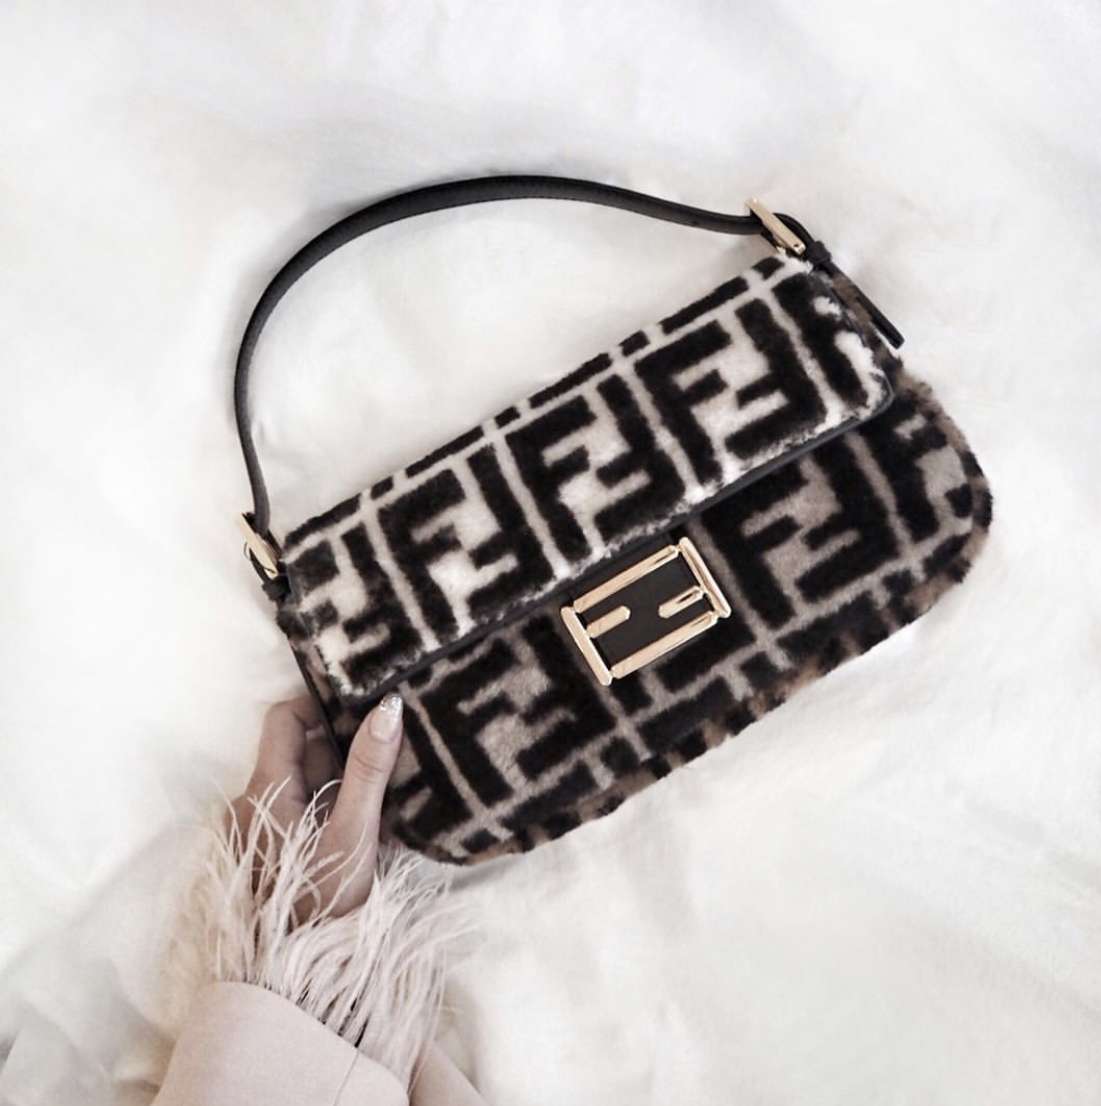 Bomb_Product_of_the_day_Fendi_Baguette_bag_2